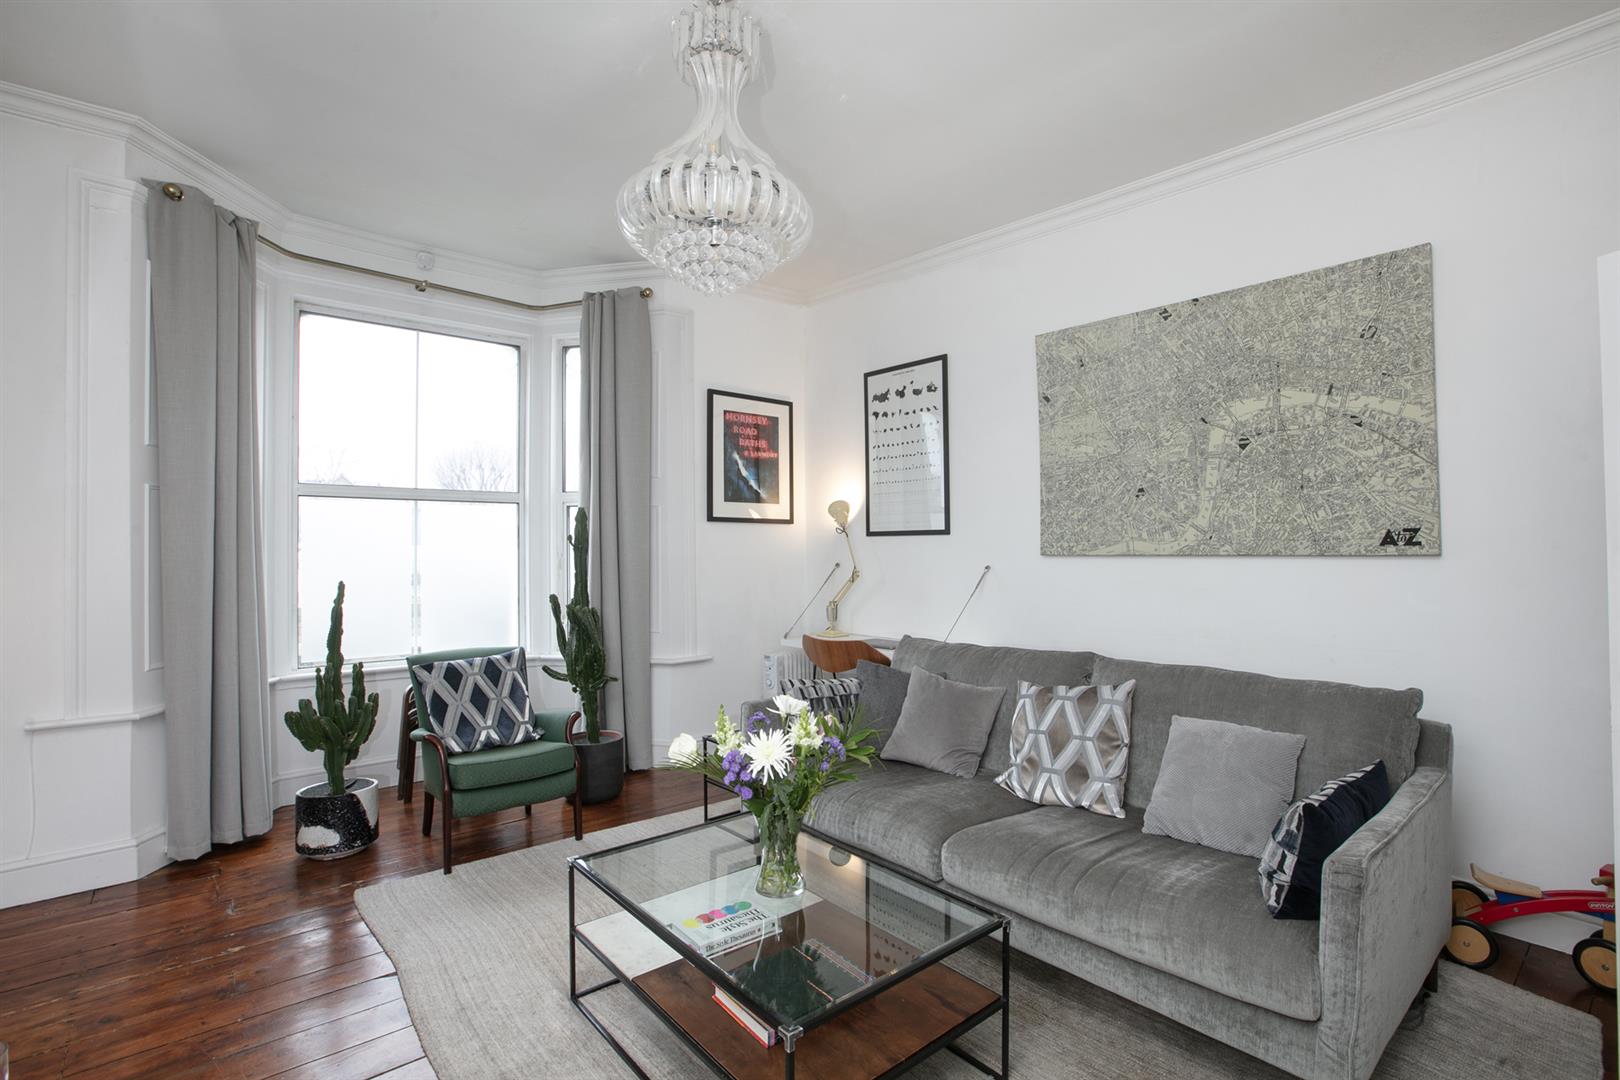 Flat - Conversion For Sale in Consort Road, Nunhead, SE15 1183 view2